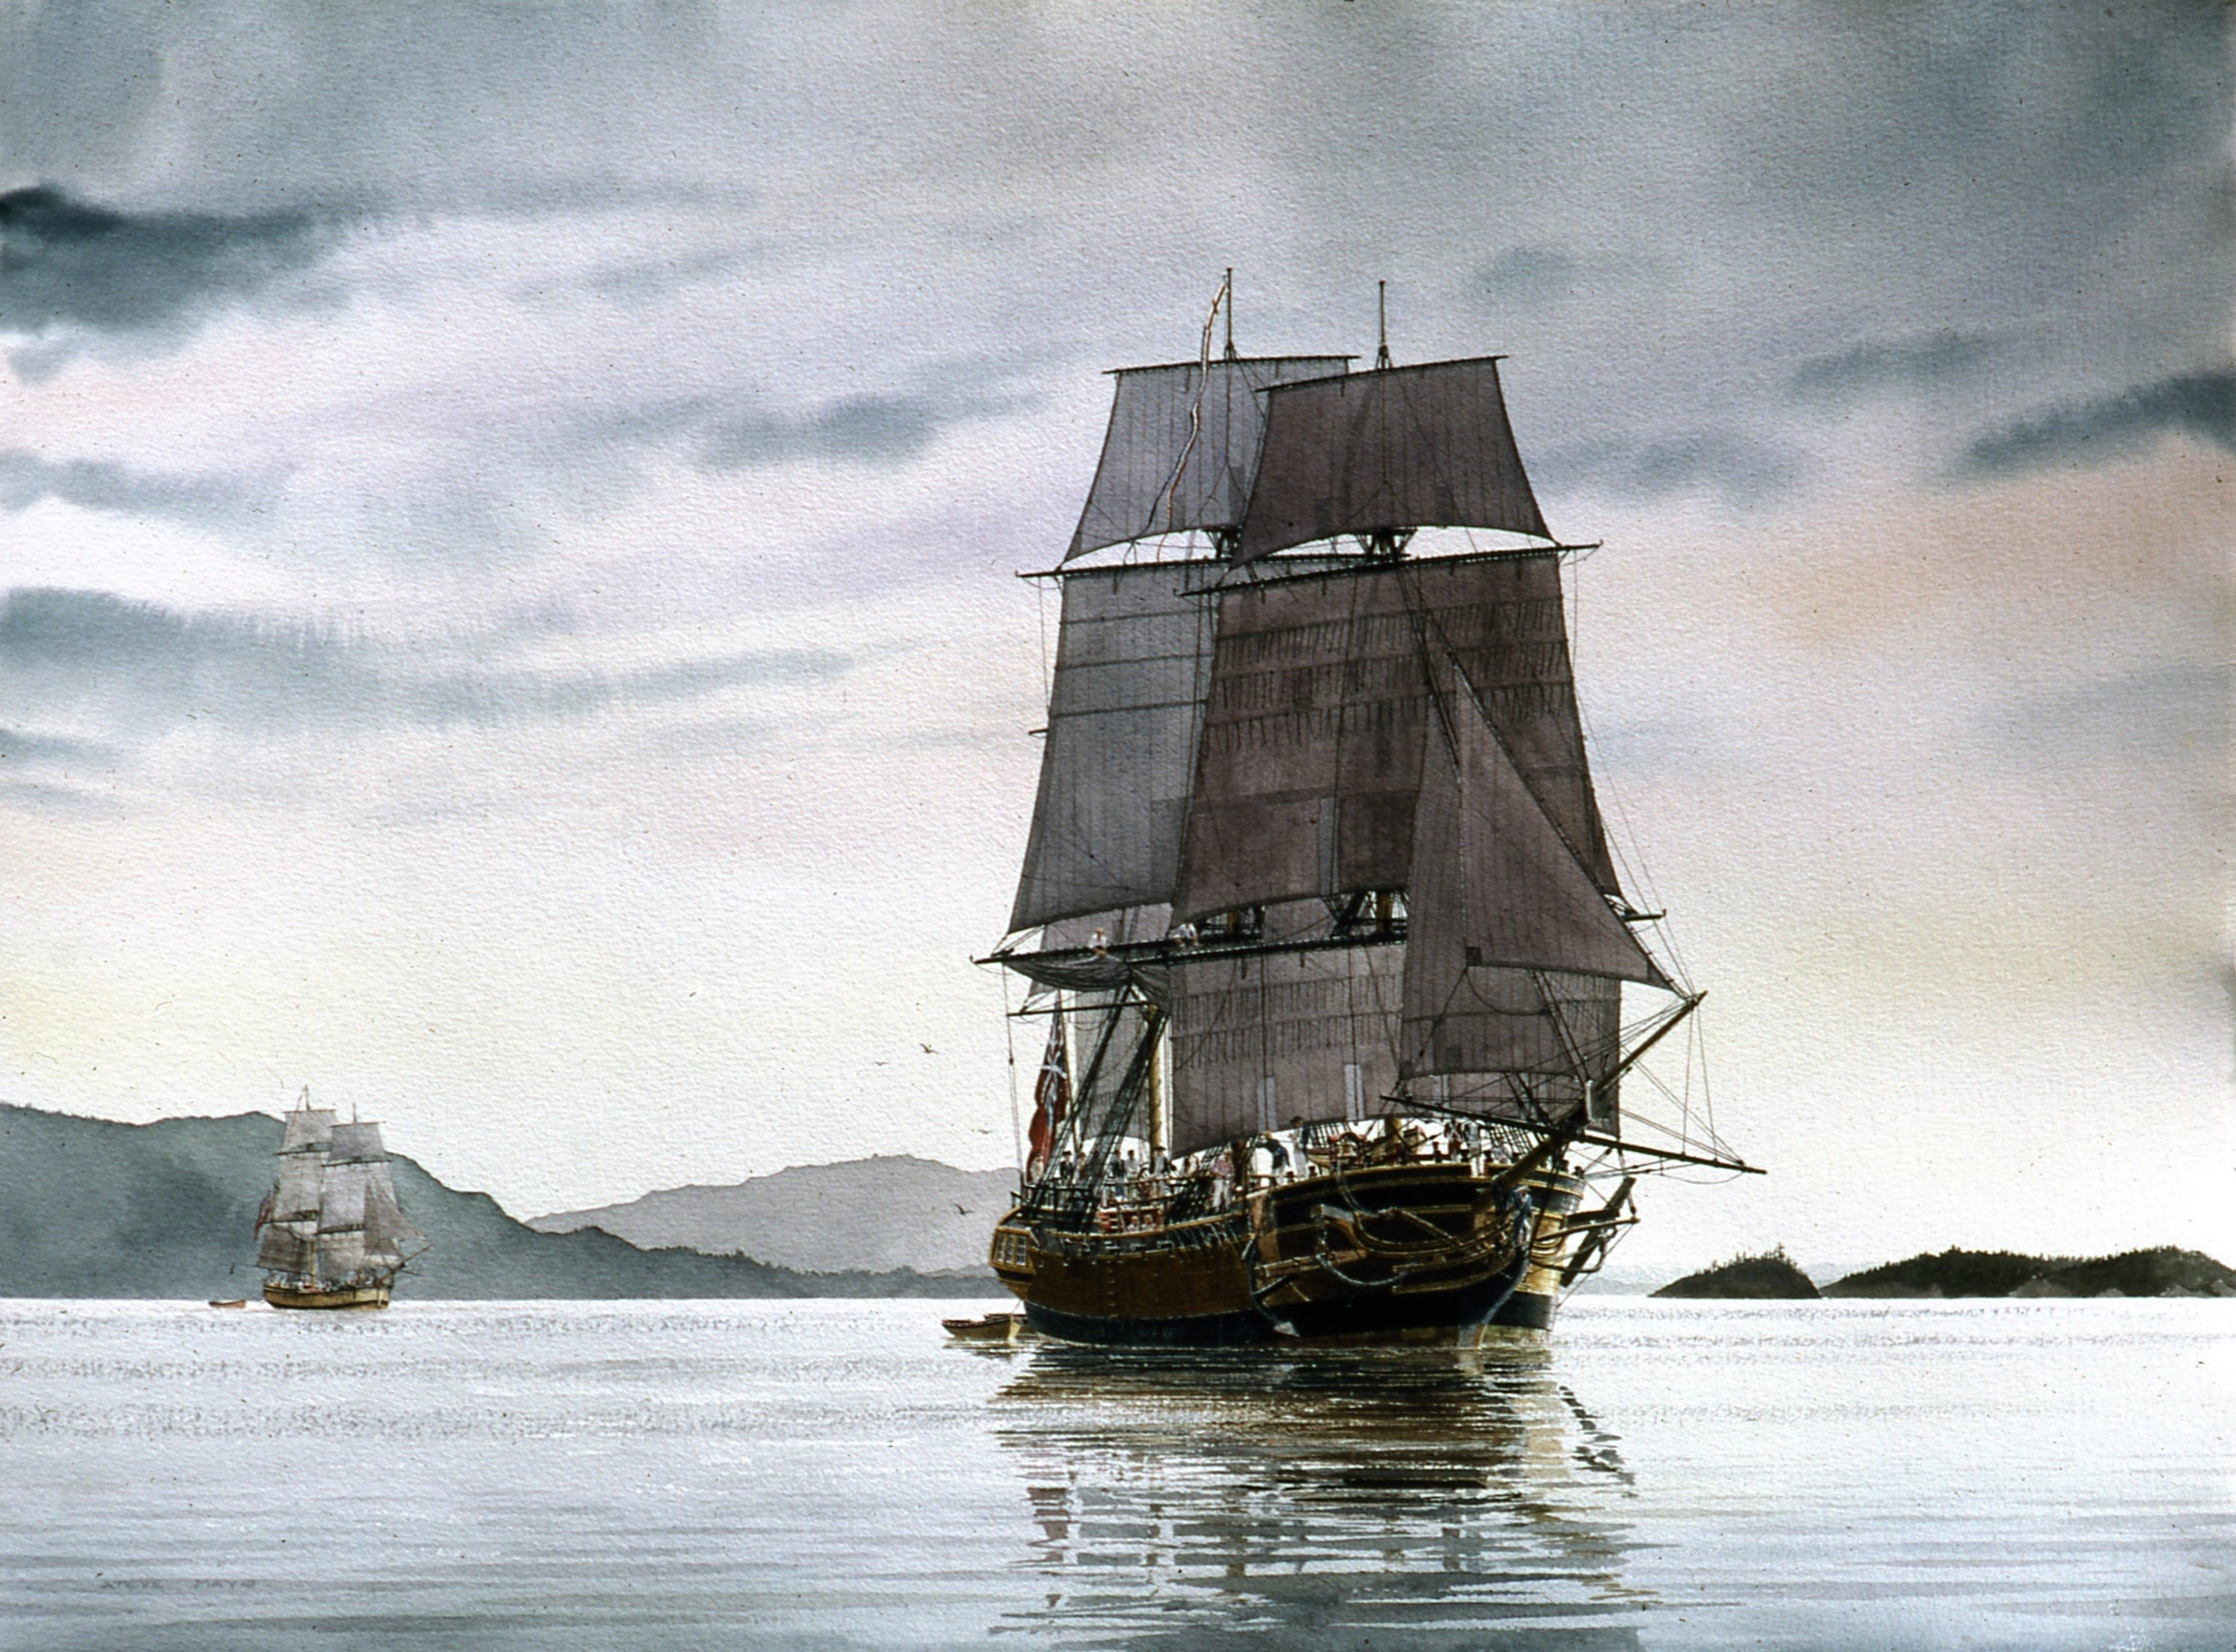 DISCOVERY & CHATHAM, June 11, 1792